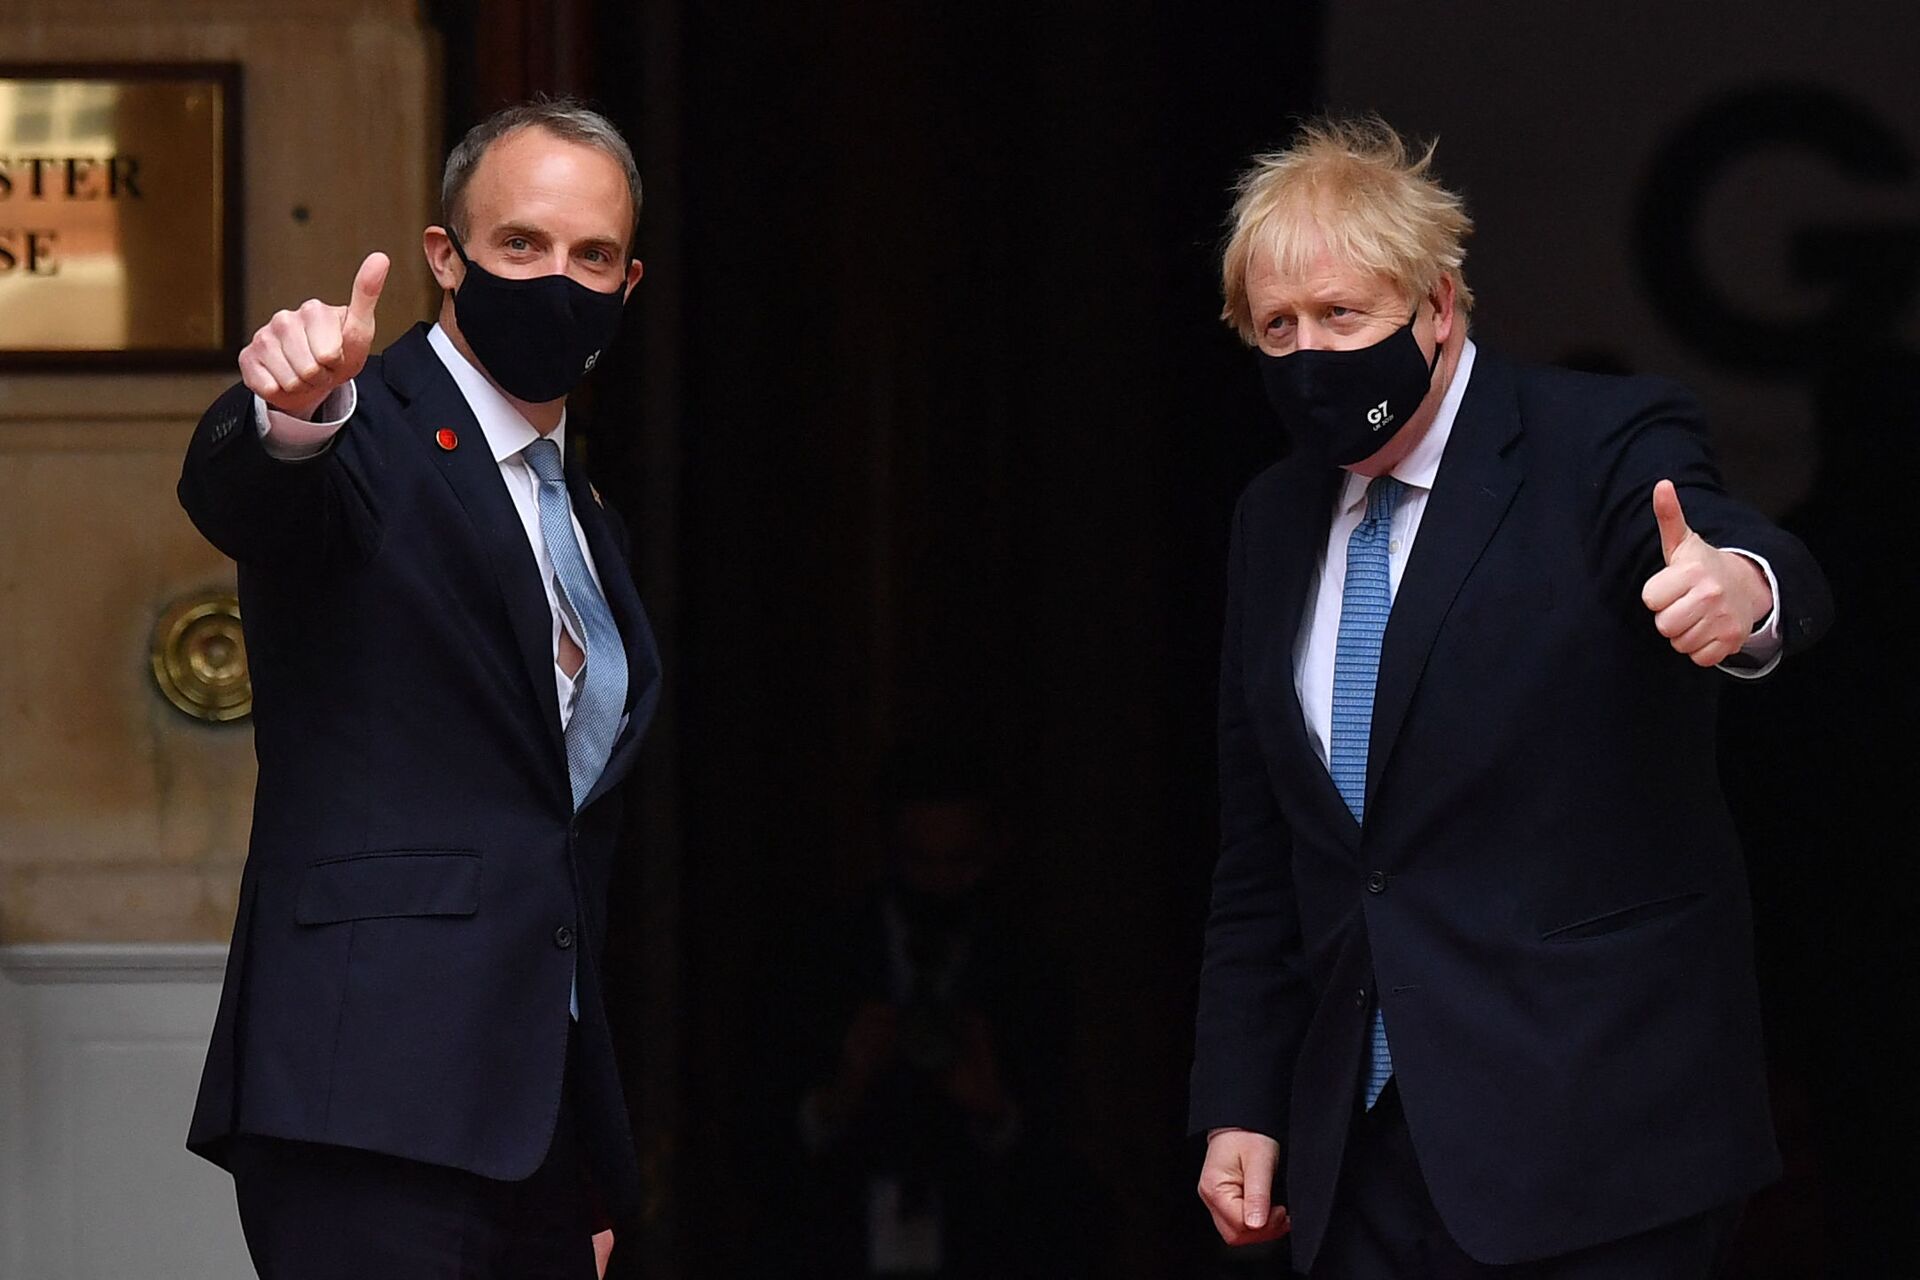 Britain's Prime Minister Boris Johnson (R) poses with Britain's Foreign Secretary Dominic Raab as he arrives at the G7 foreign ministers meeting in London on May 5, 2021 - Sputnik International, 1920, 07.09.2021